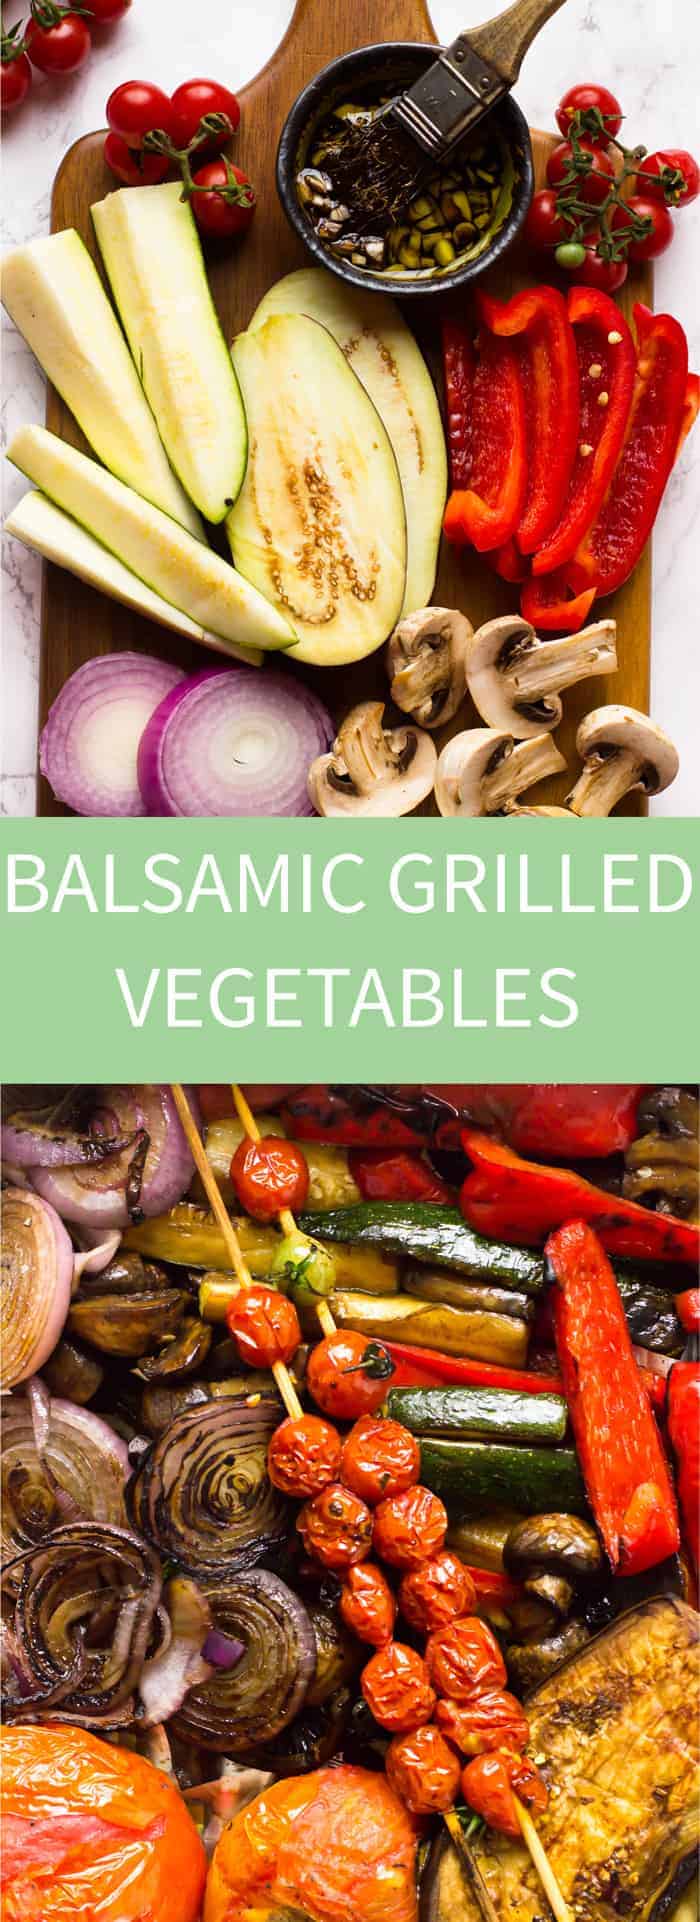 These Balsamic Grilled Vegetables are marinated in the most flavourful balsamic dressing and come out so juicy and delicious!